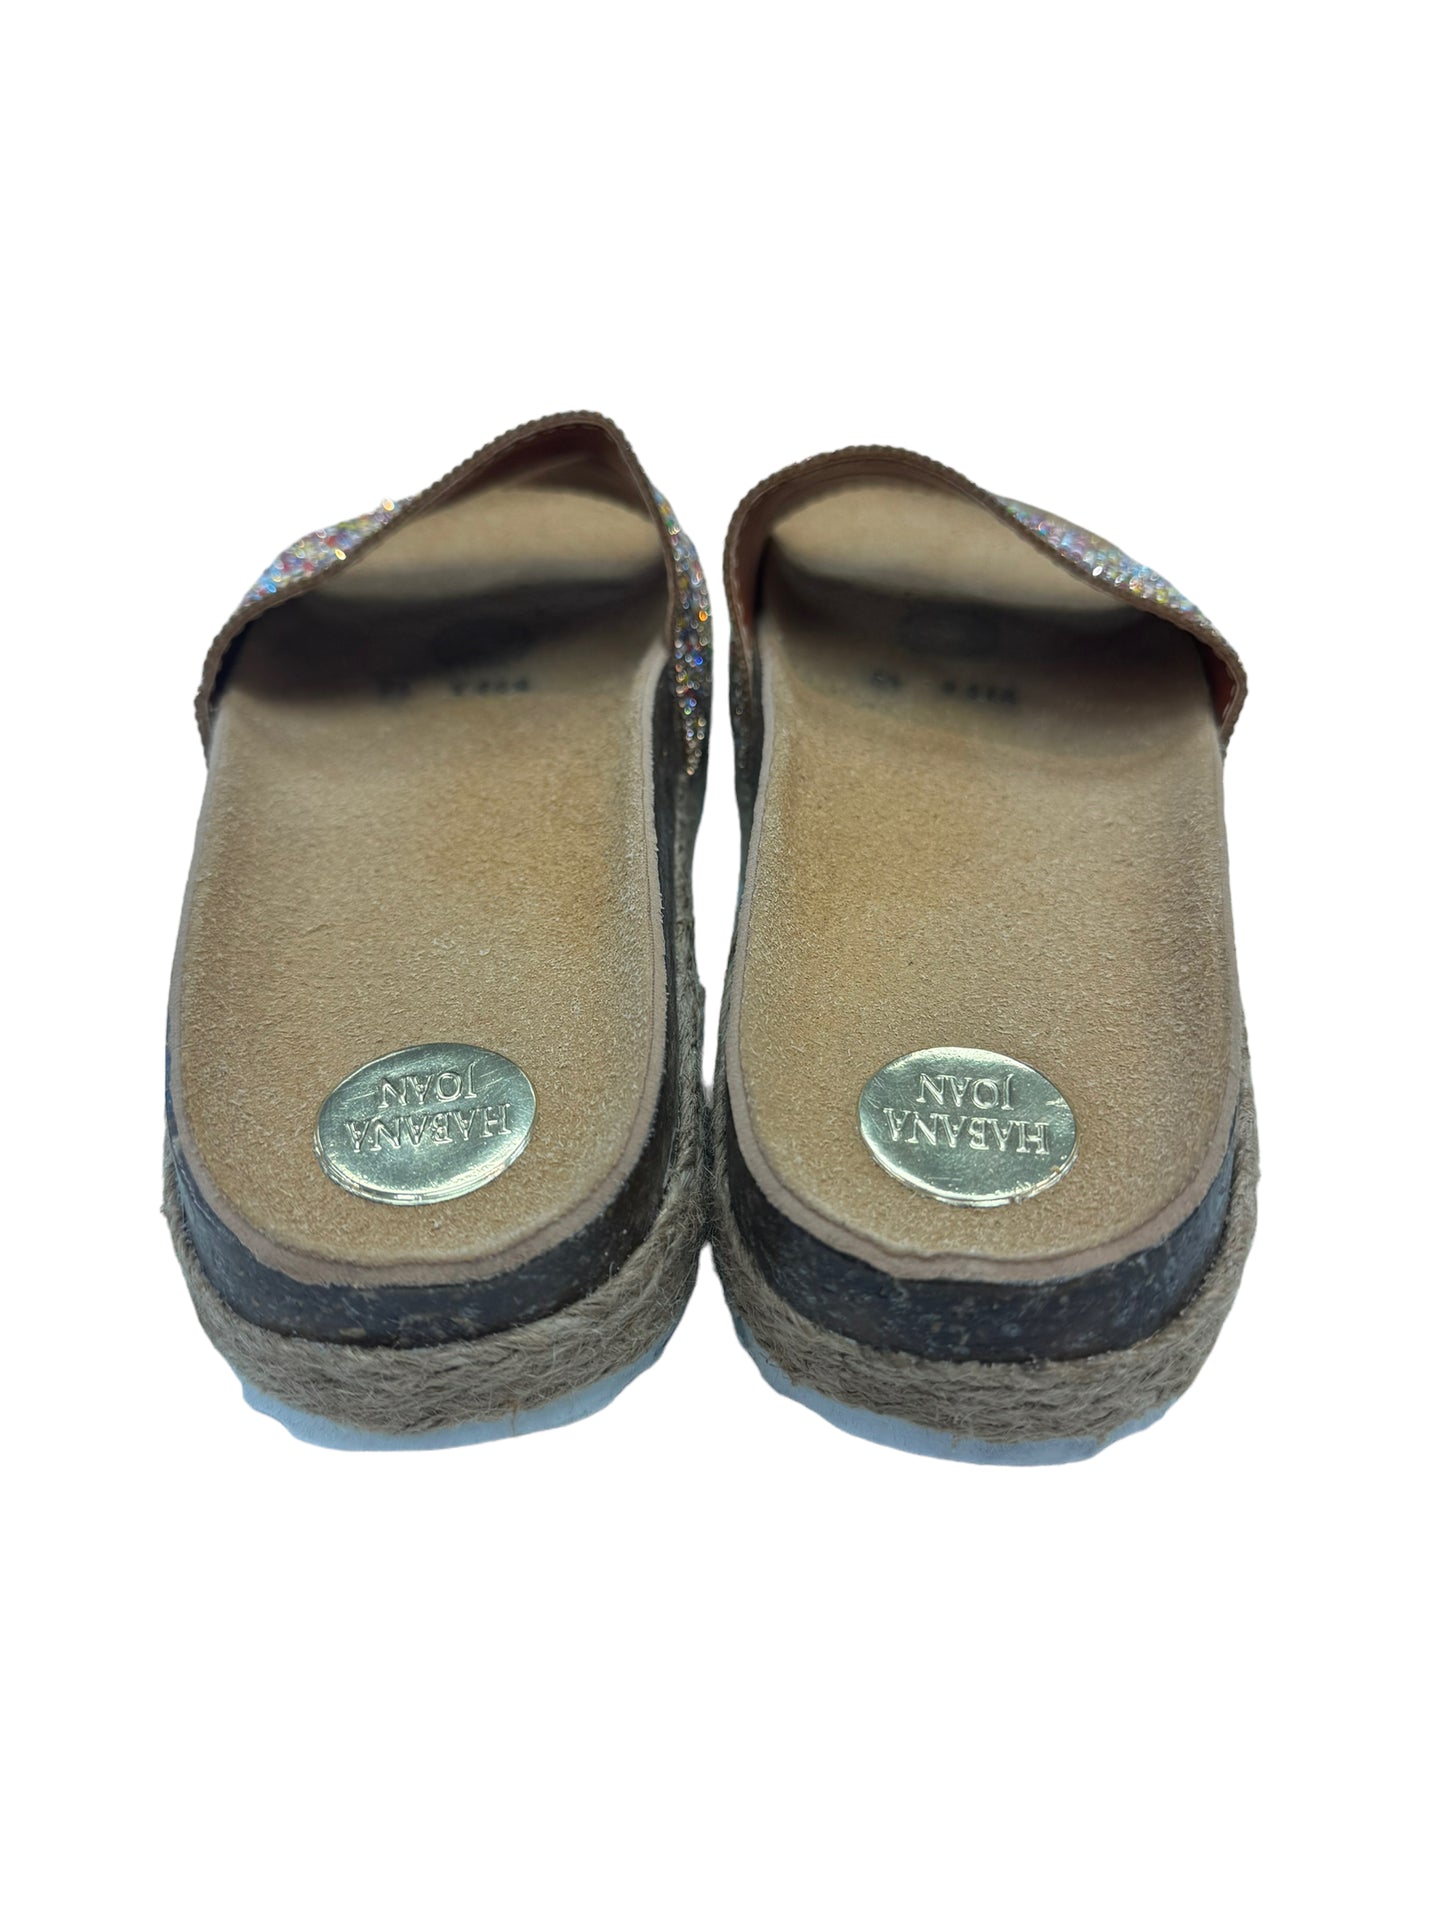 Sandals Flats By Cmc  Size: 7.5